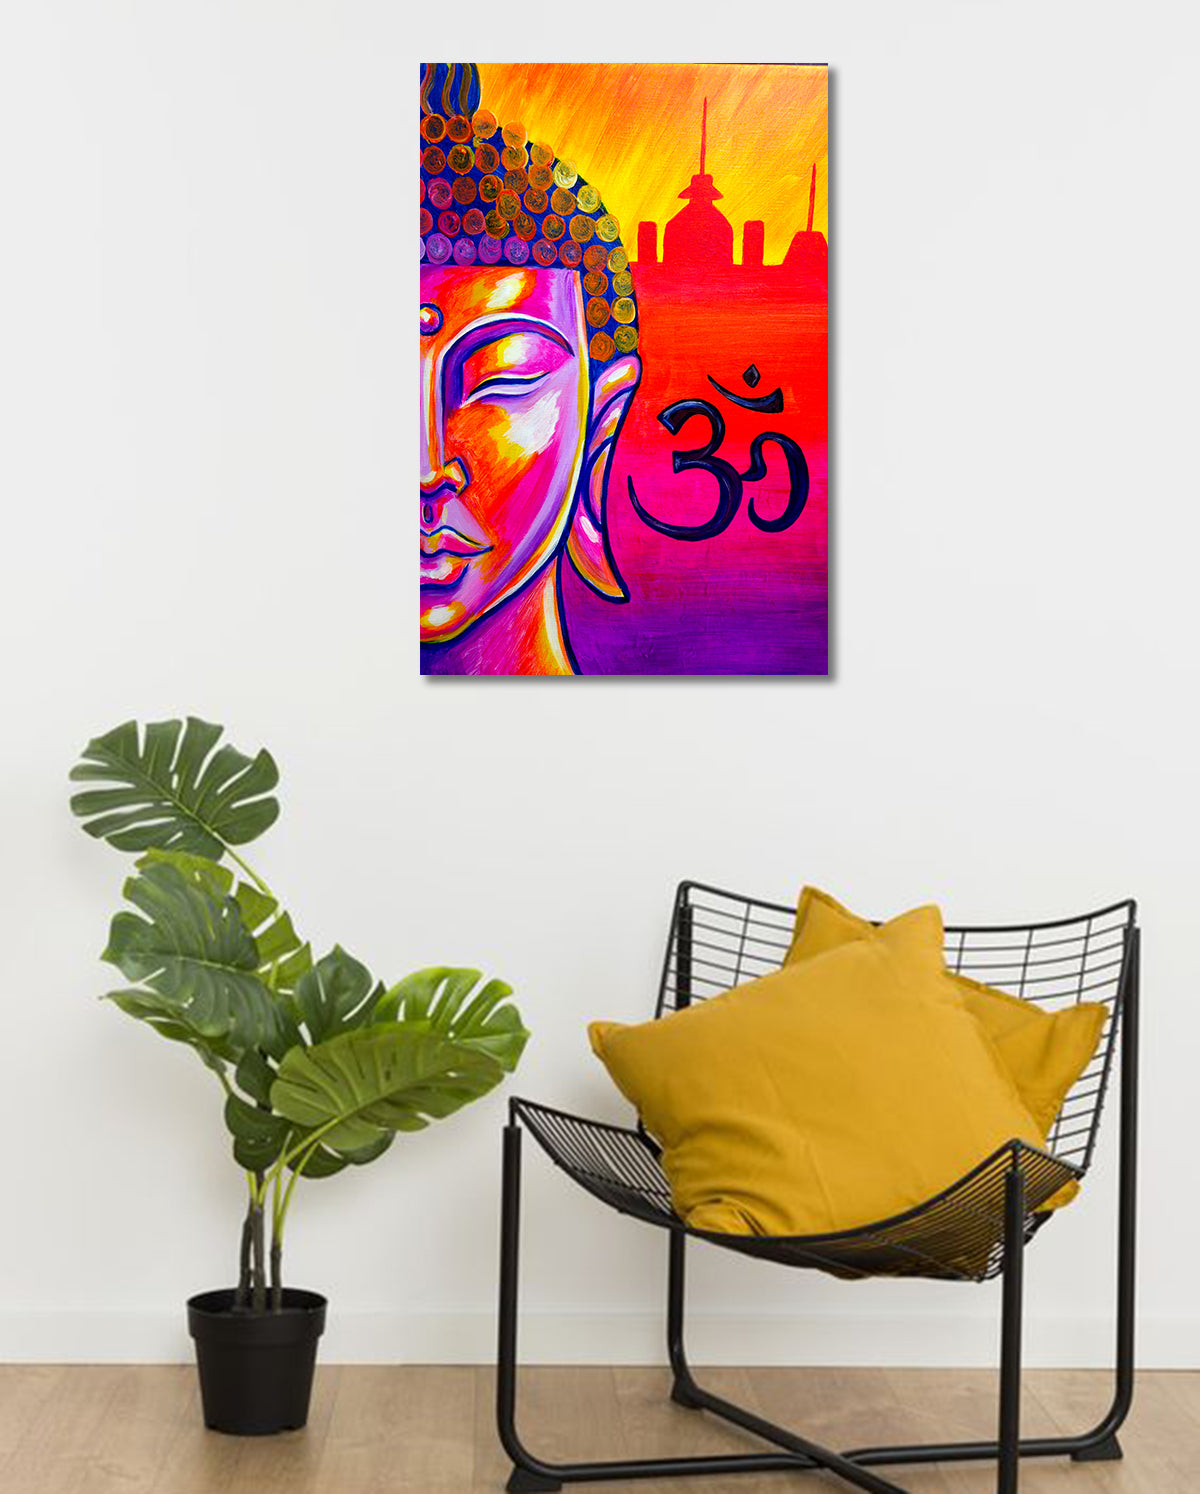 A Peaceful World - Unframed Canvas Painting